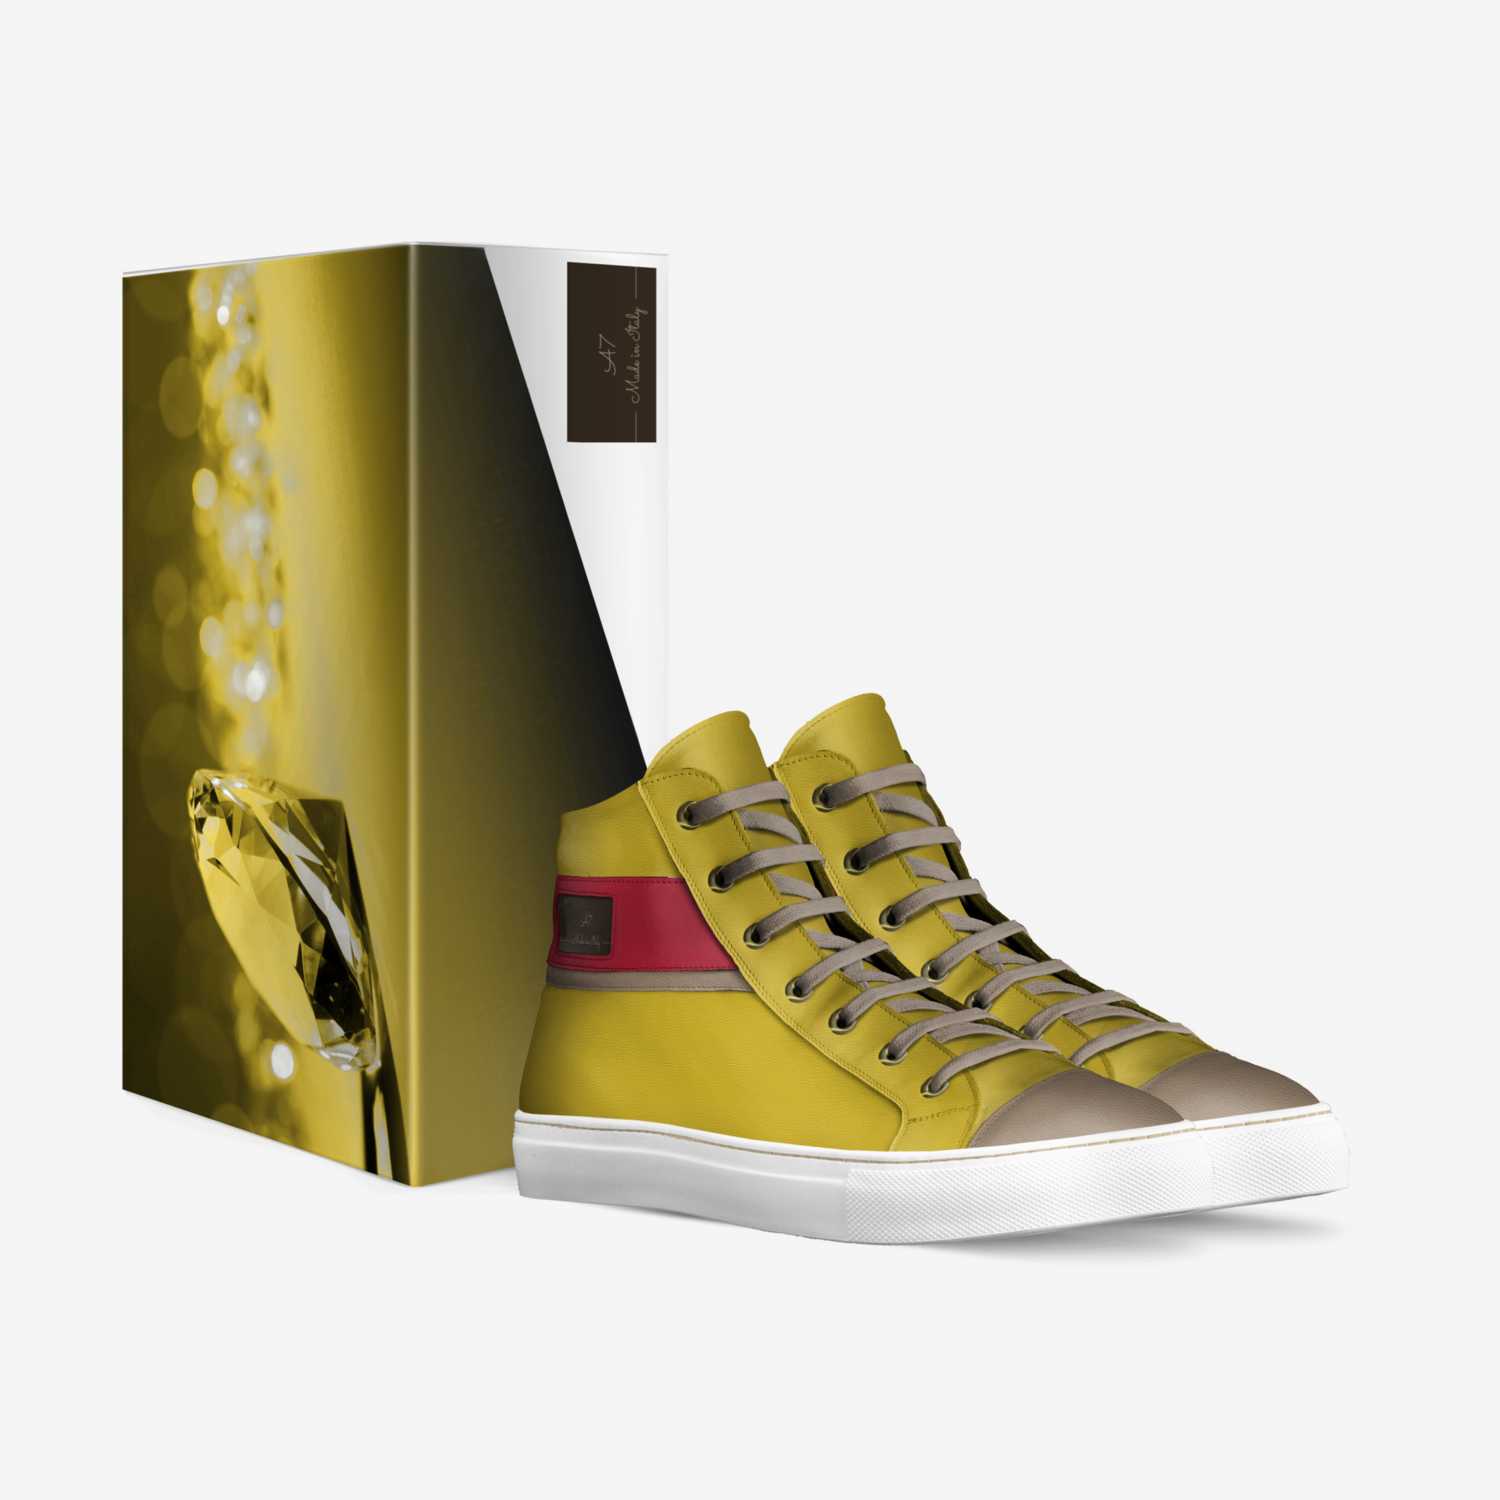 A7 custom made in Italy shoes by Aldarion Tidmore | Box view